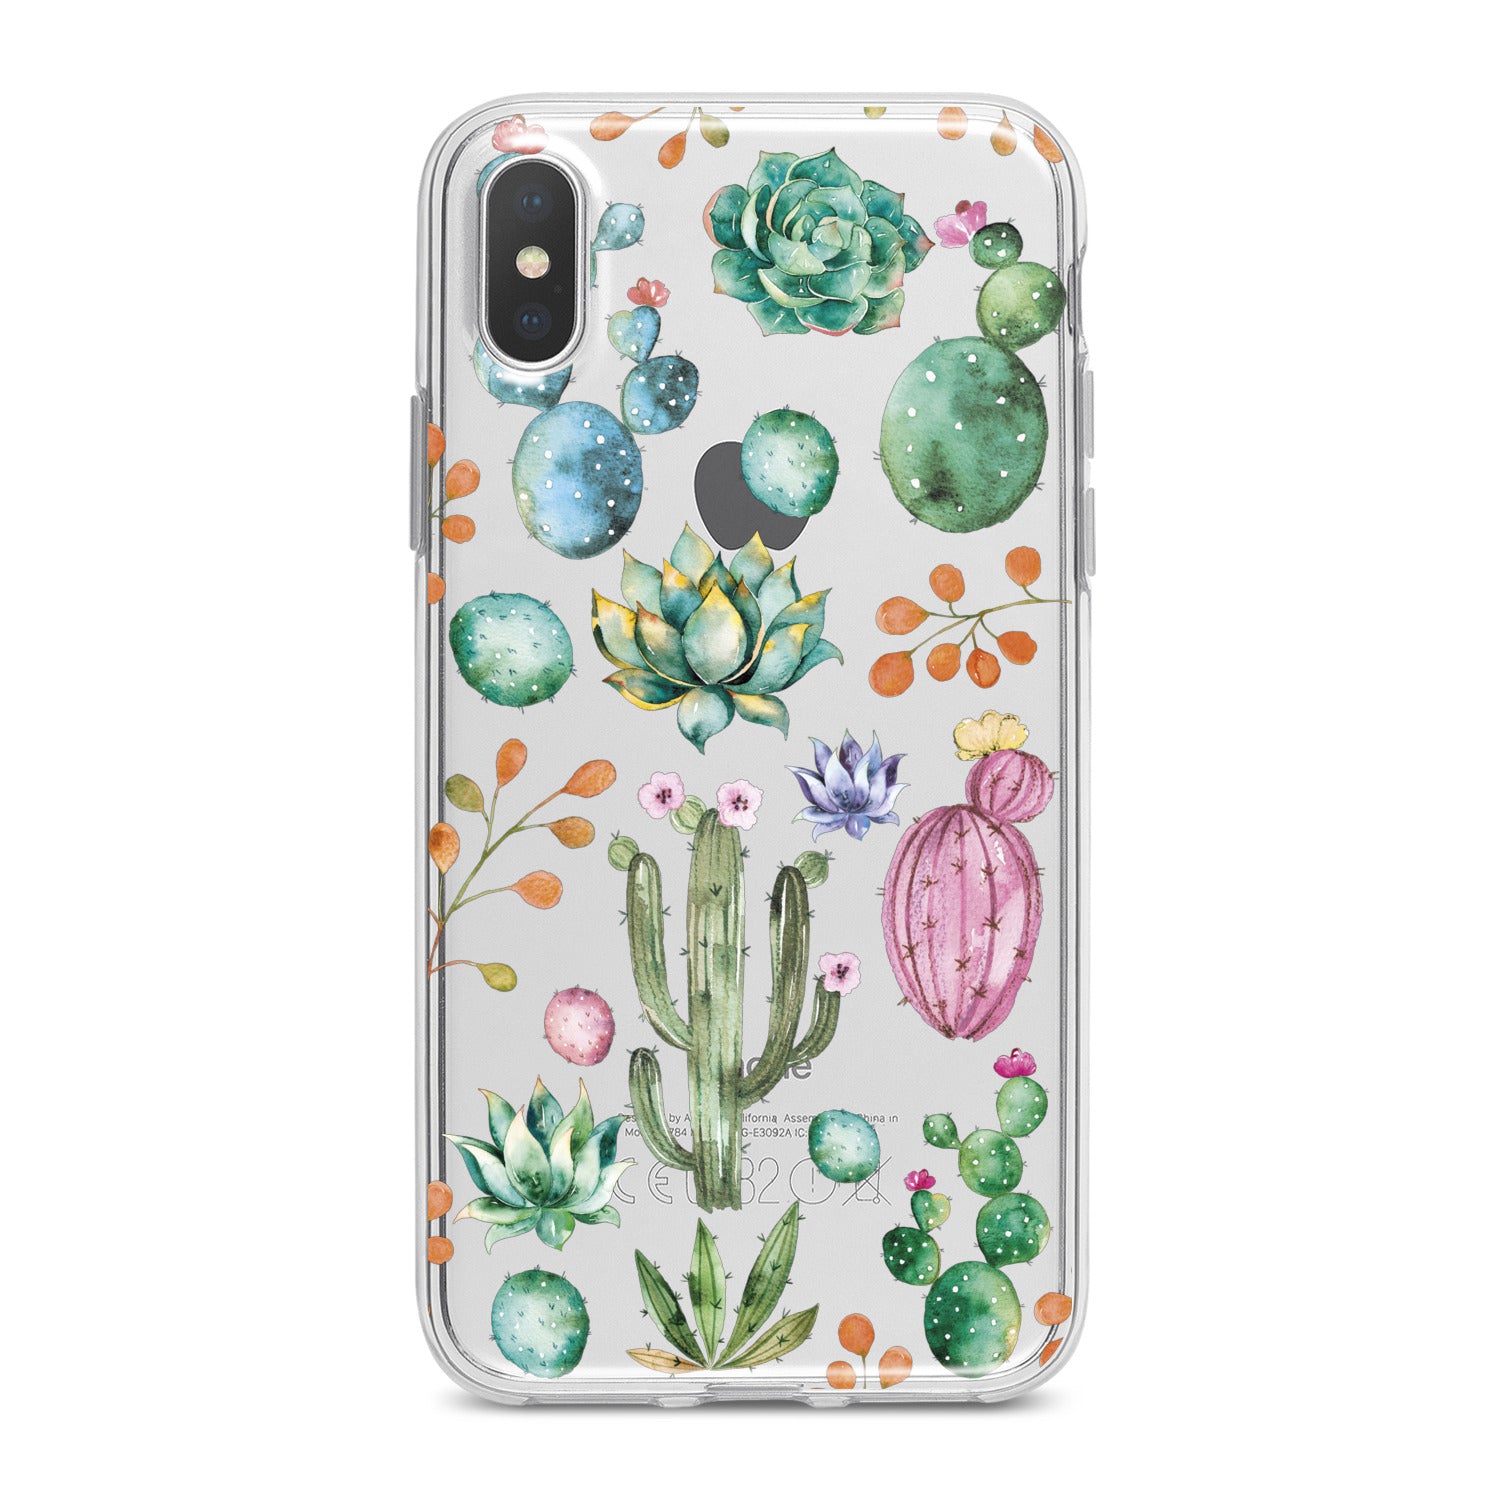 Lex Altern Green Cactuses Phone Case for your iPhone & Android phone.